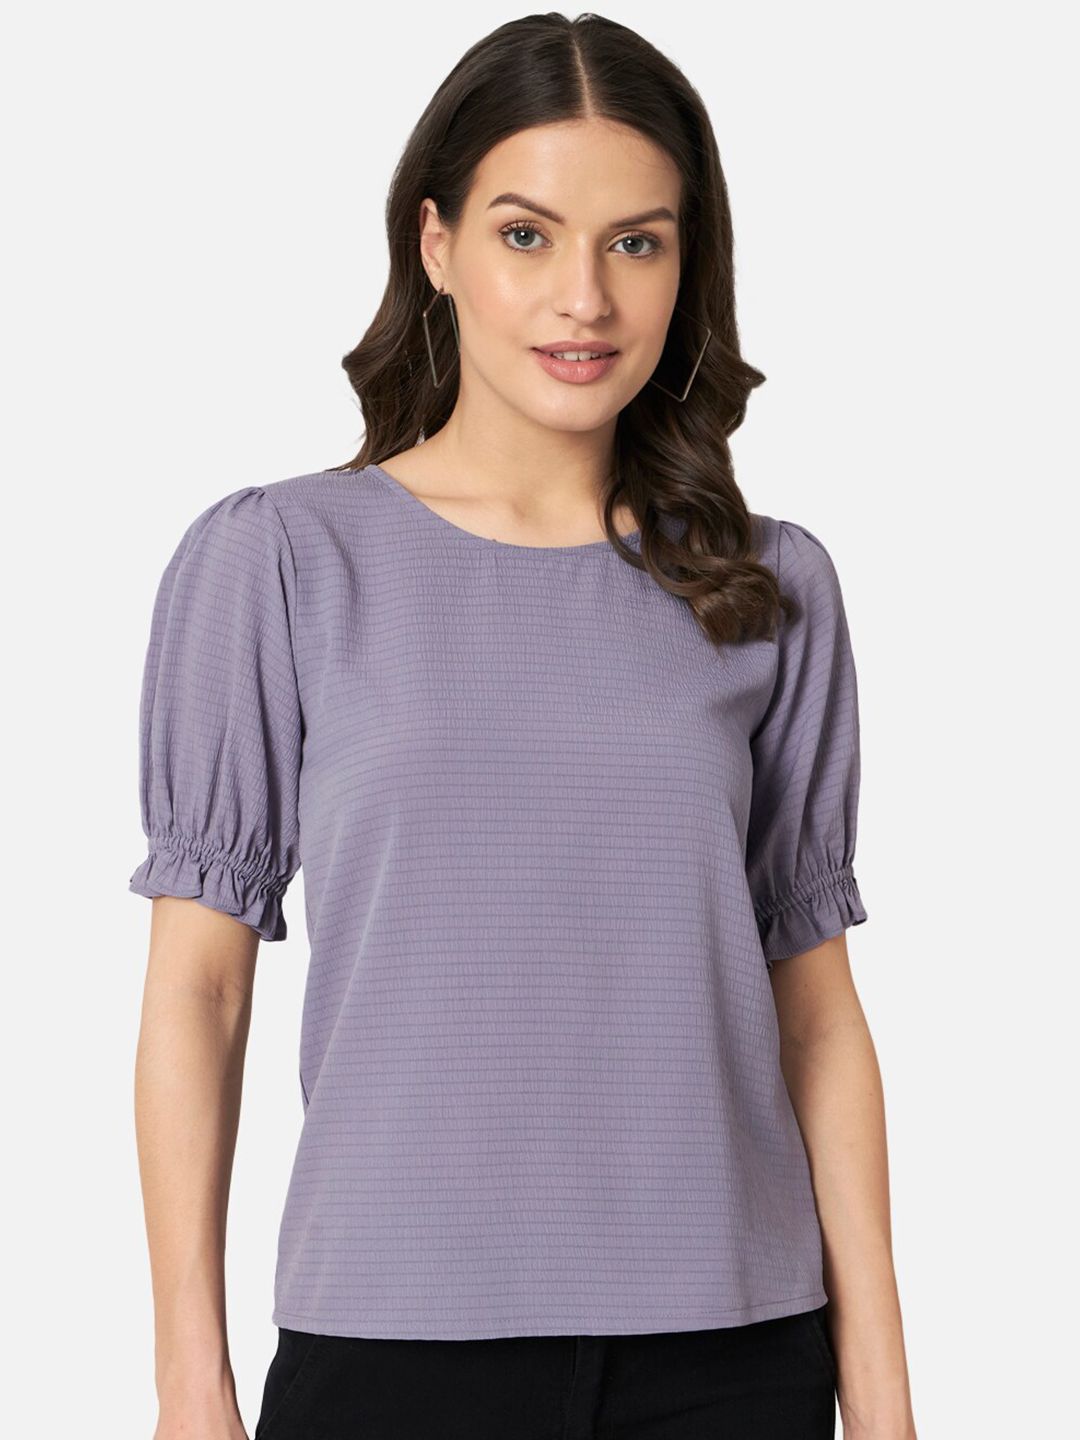 BAESD Self Design Puff Sleeves Top Price in India